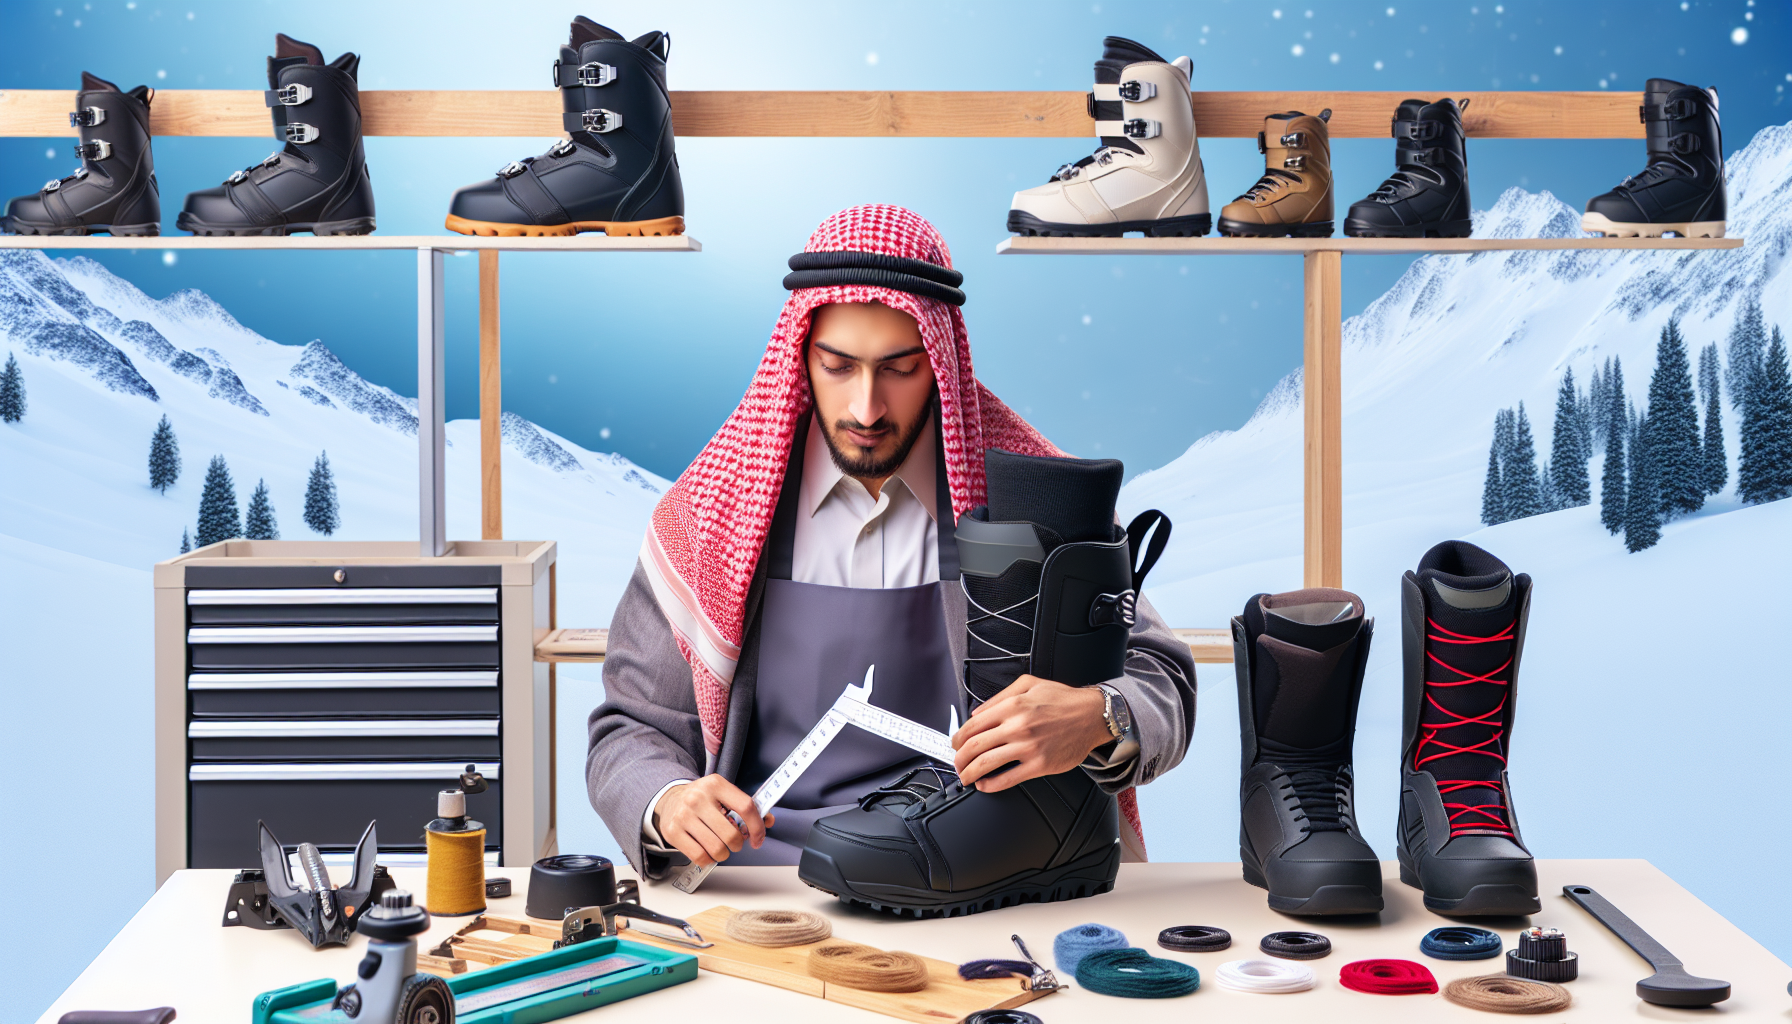 Finding the perfect fit for snowboard boots